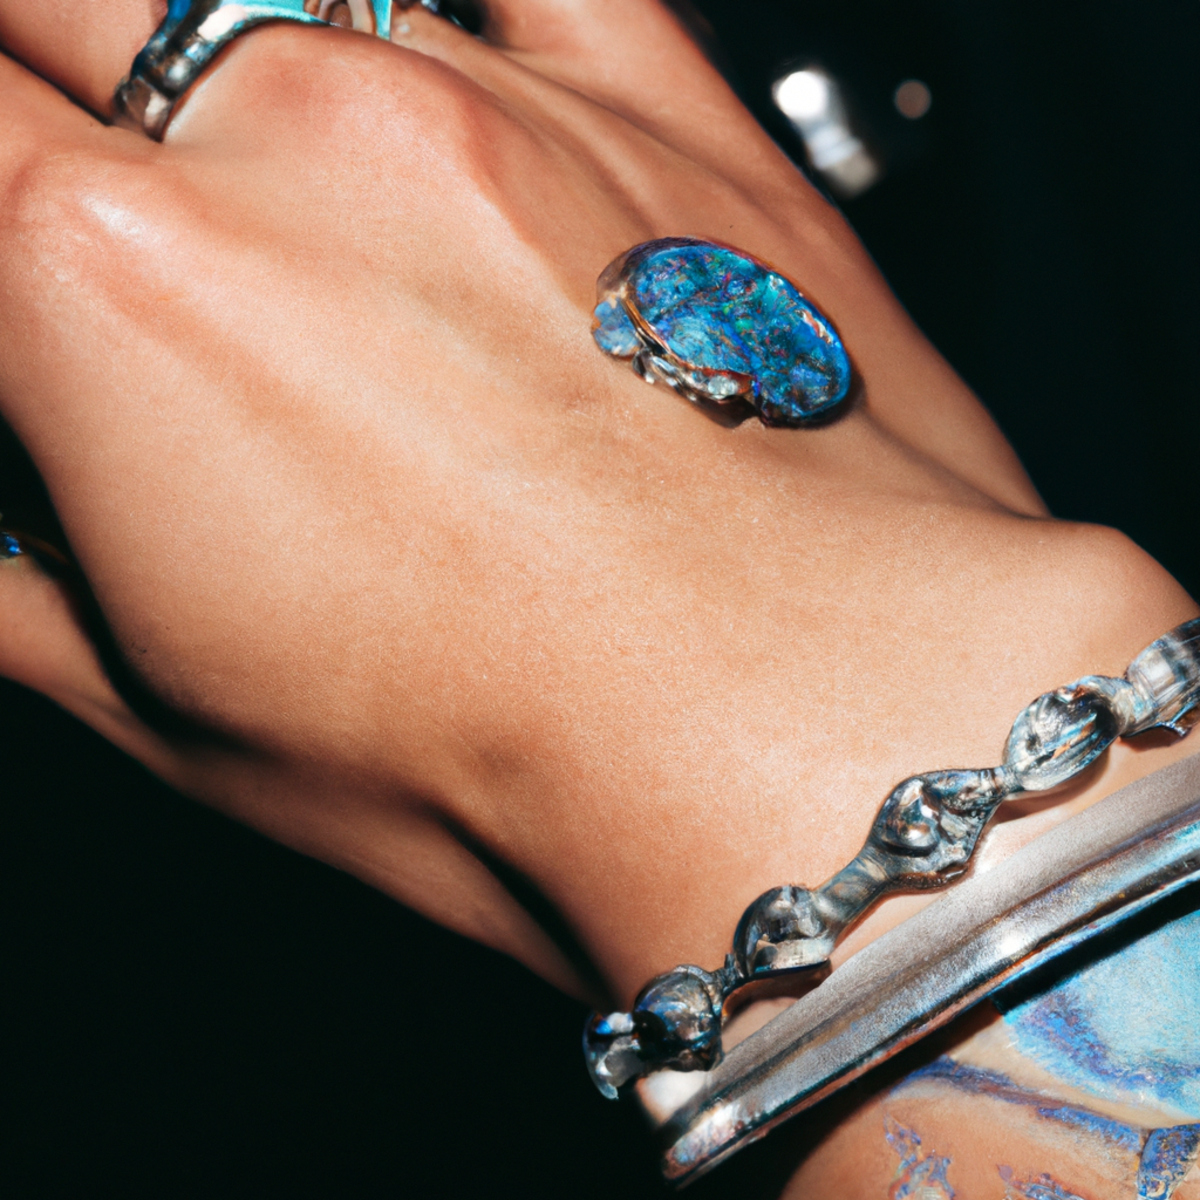 Close-up of bluish hand with silver jewelry, revealing intricate details and subtle metallic sheen.